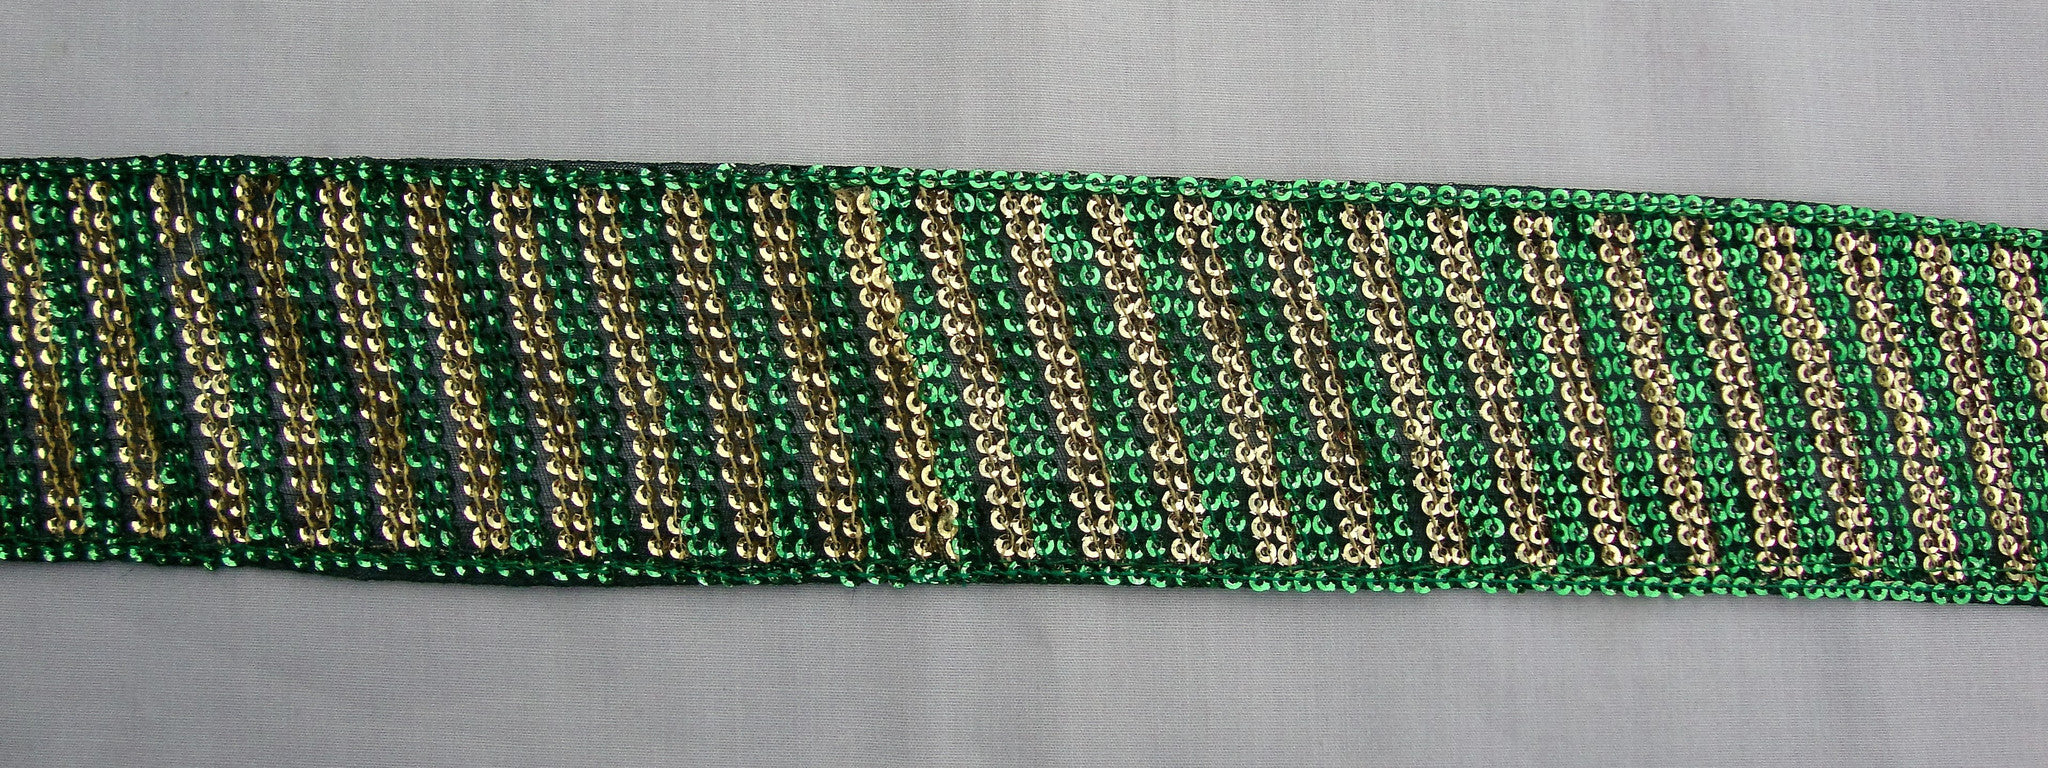 Green Trimming with sequins (Sold as a 3 yard piece)